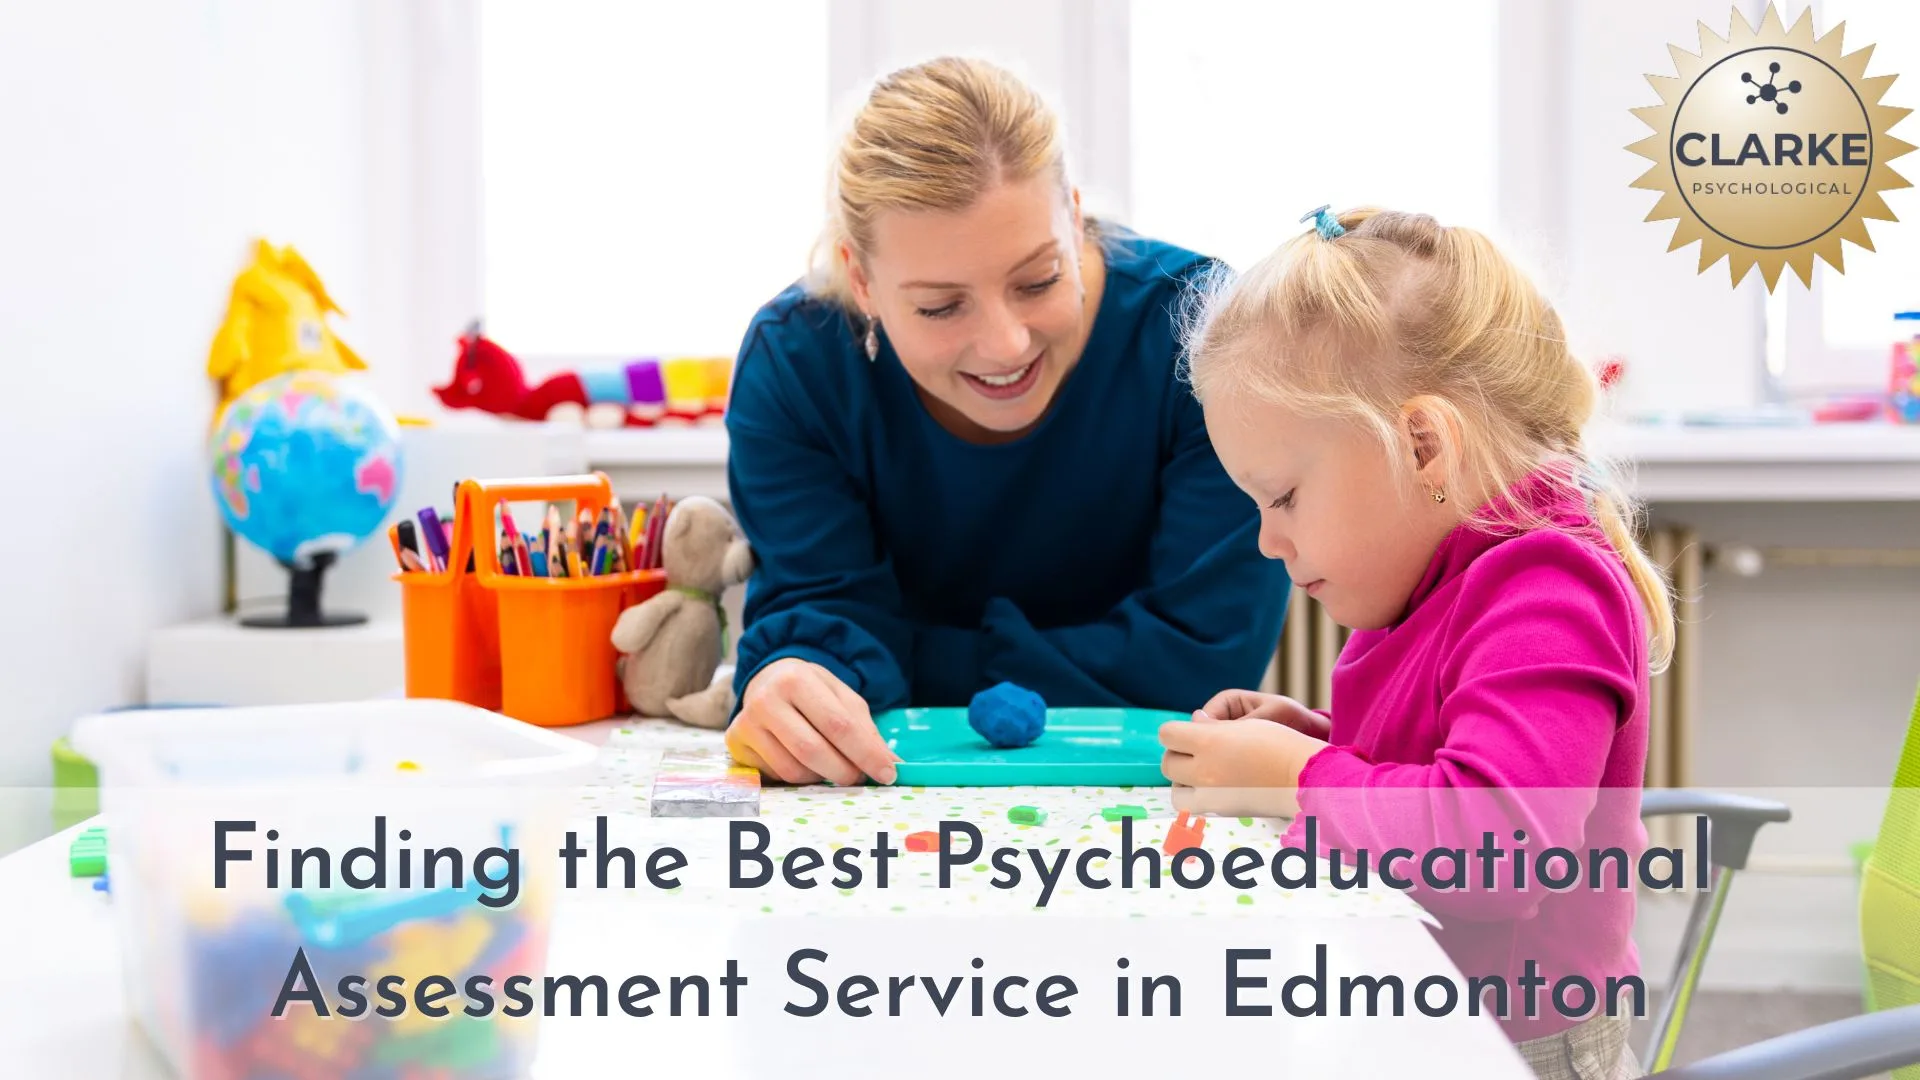 Find the Best Psychoeducational Assessment Service in Edmonton